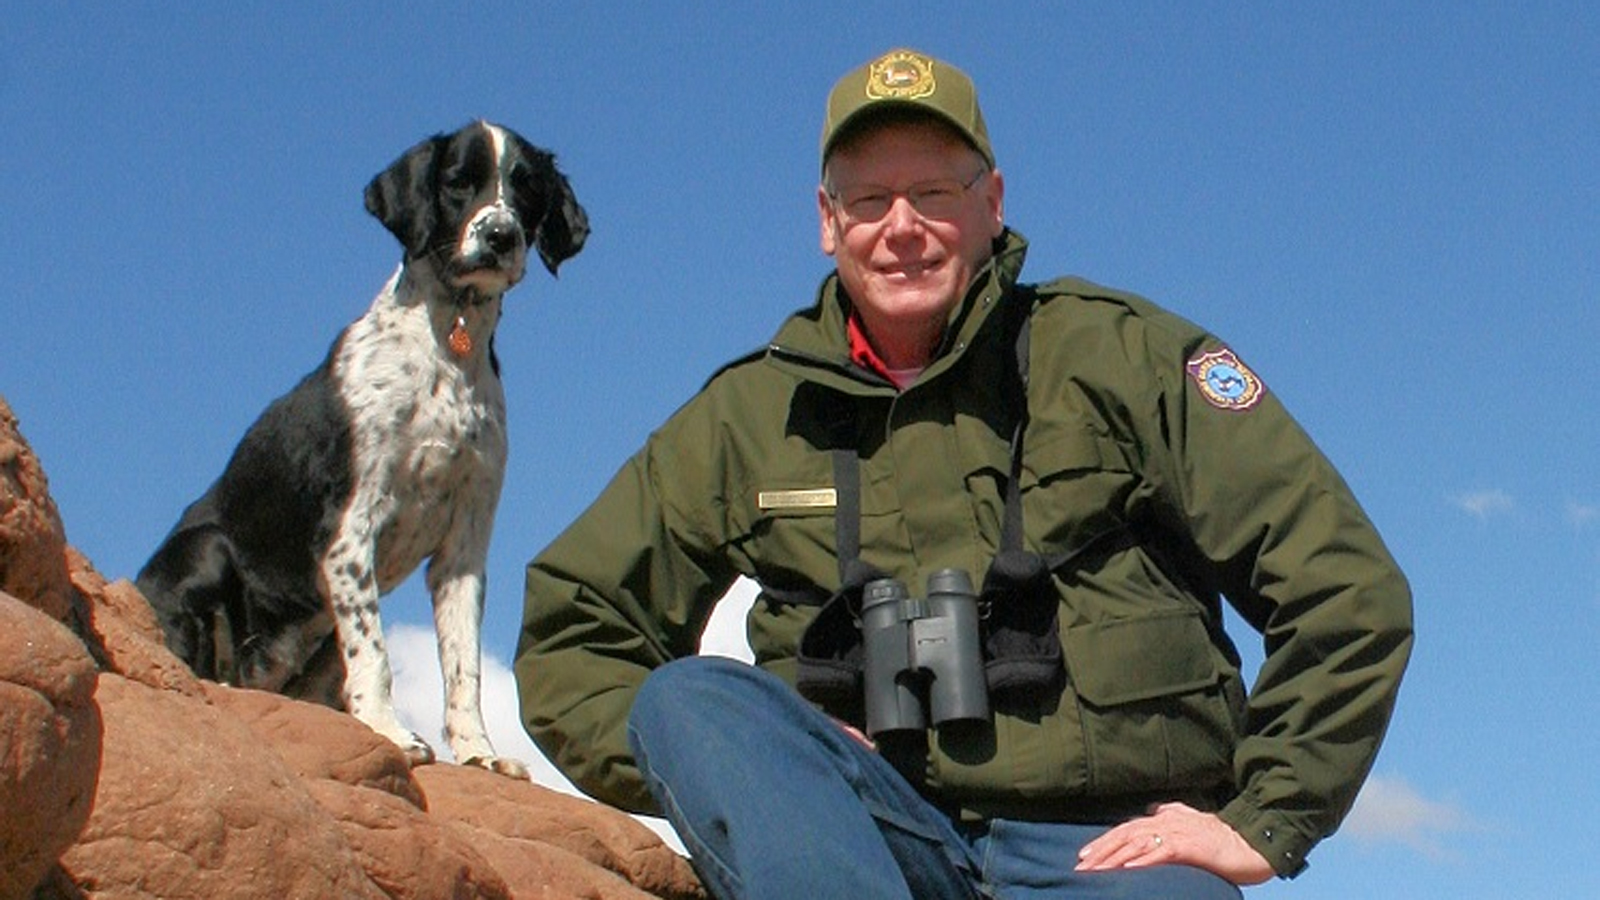 SNR Alumni: Tom Christiansen - Wildlife management course turns out to more than your run of the mill elective